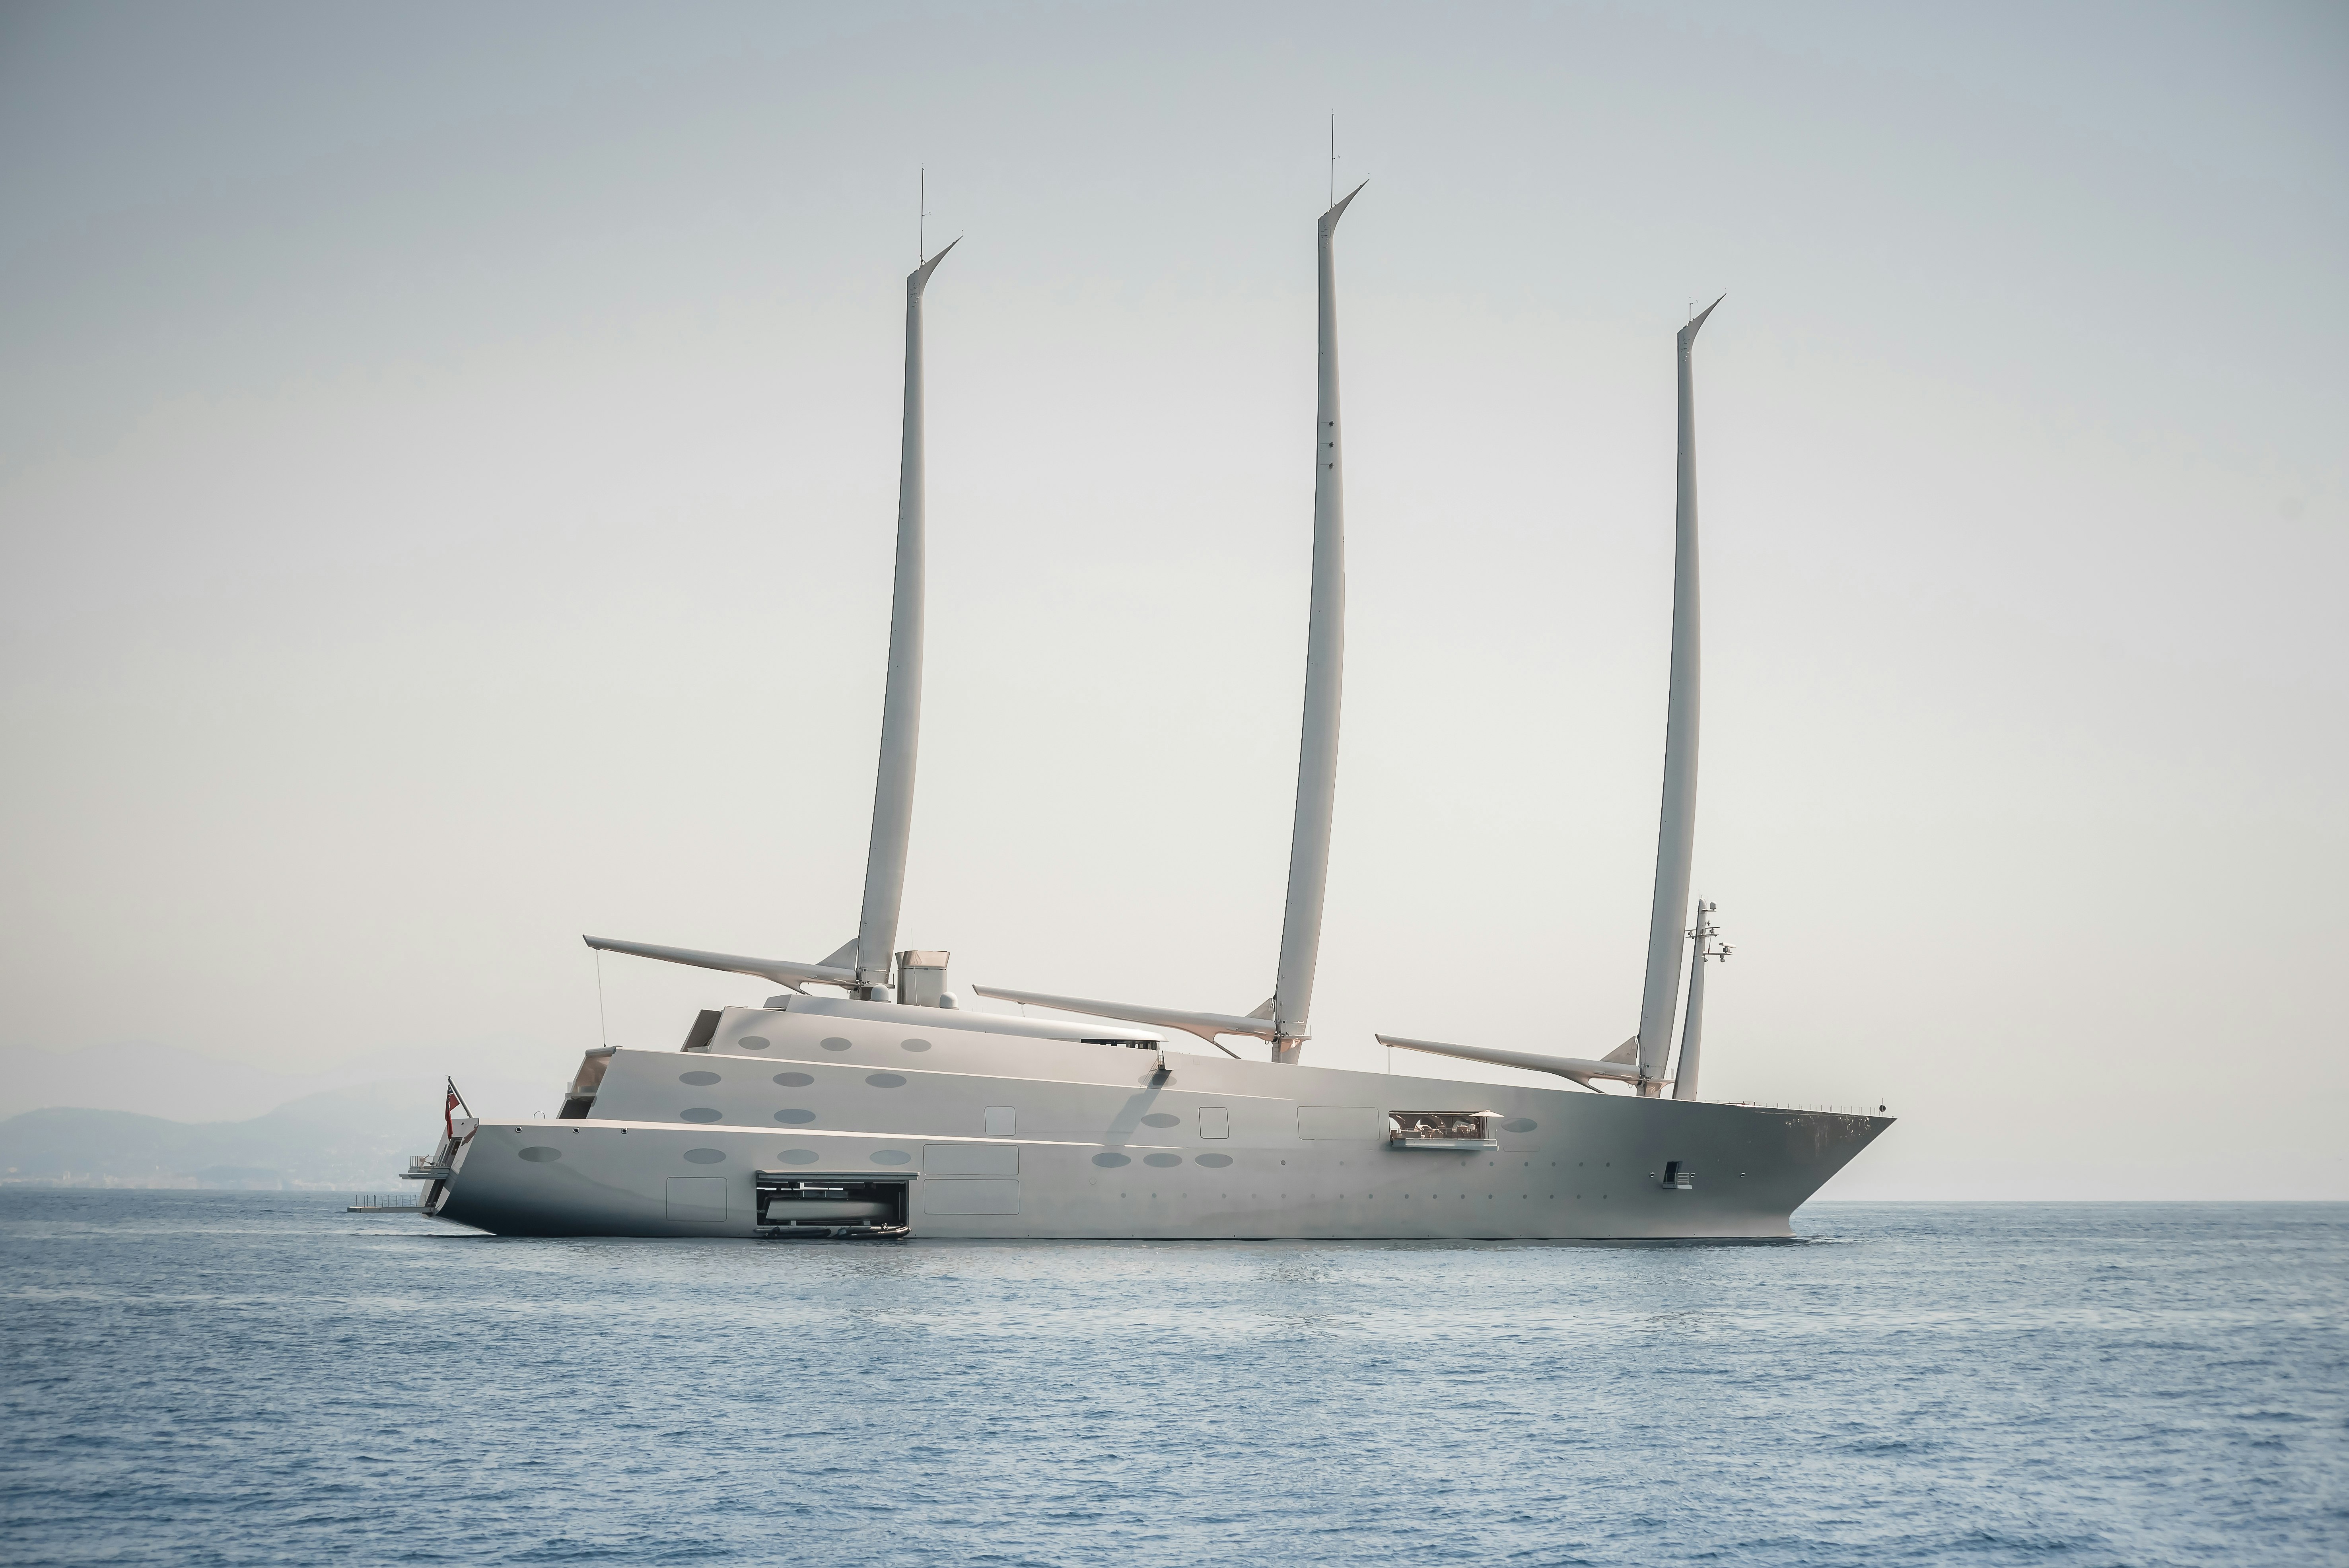 Modern vessels already look completely different and their design is stunning